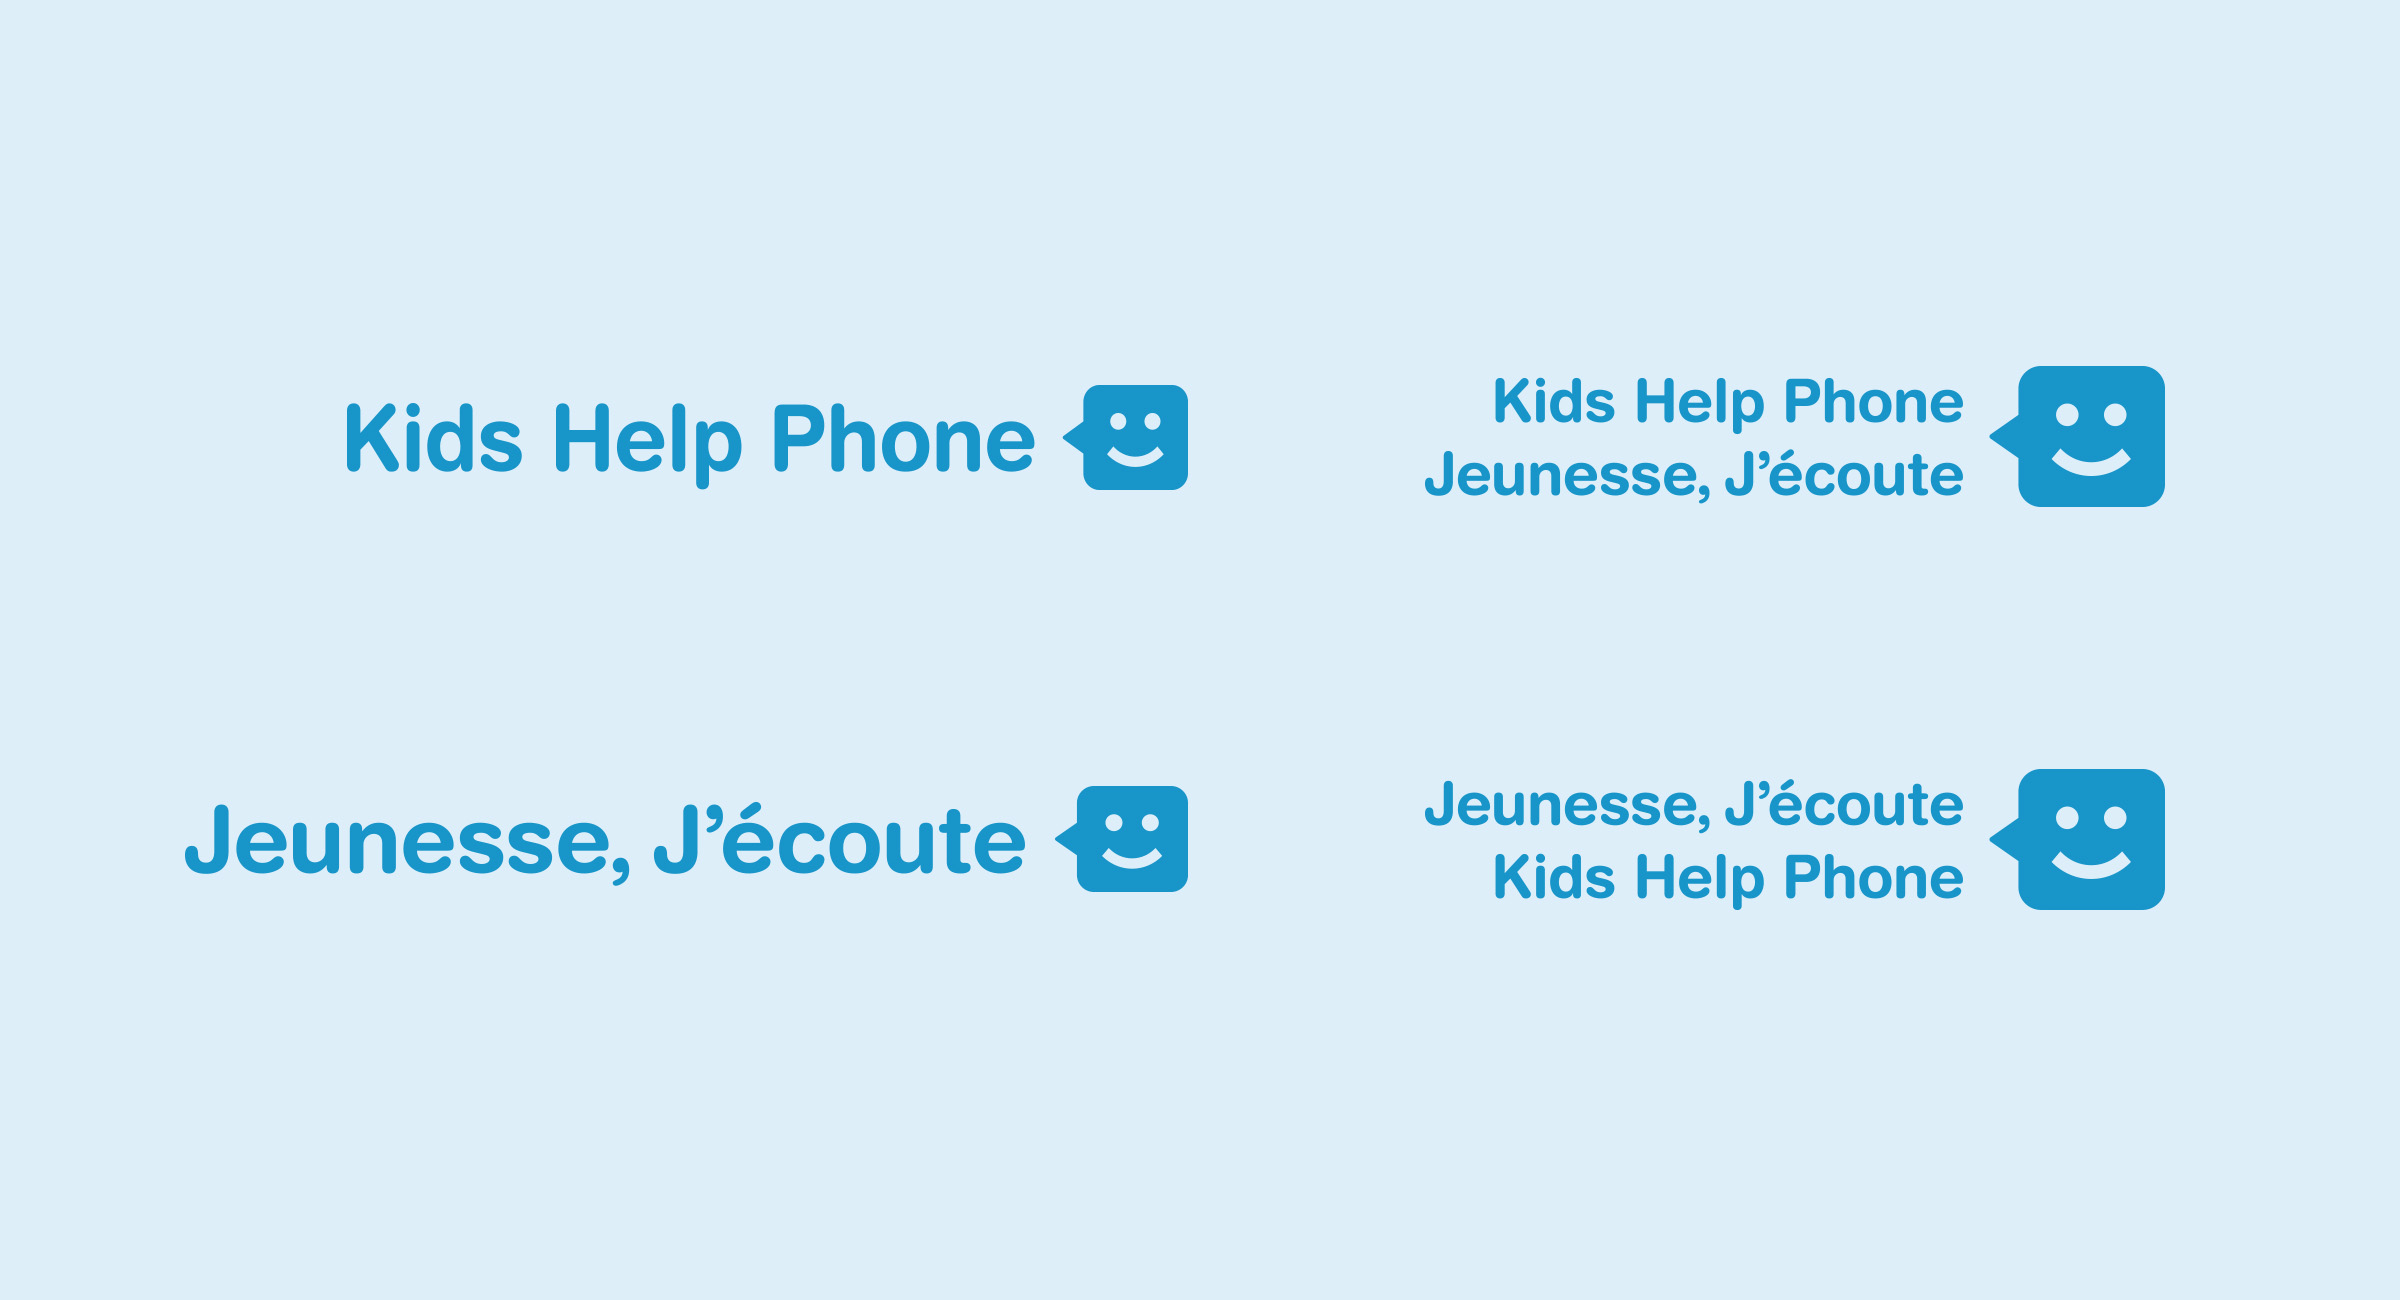 English, French, and bilingual versions of the Kids Help Phone logo